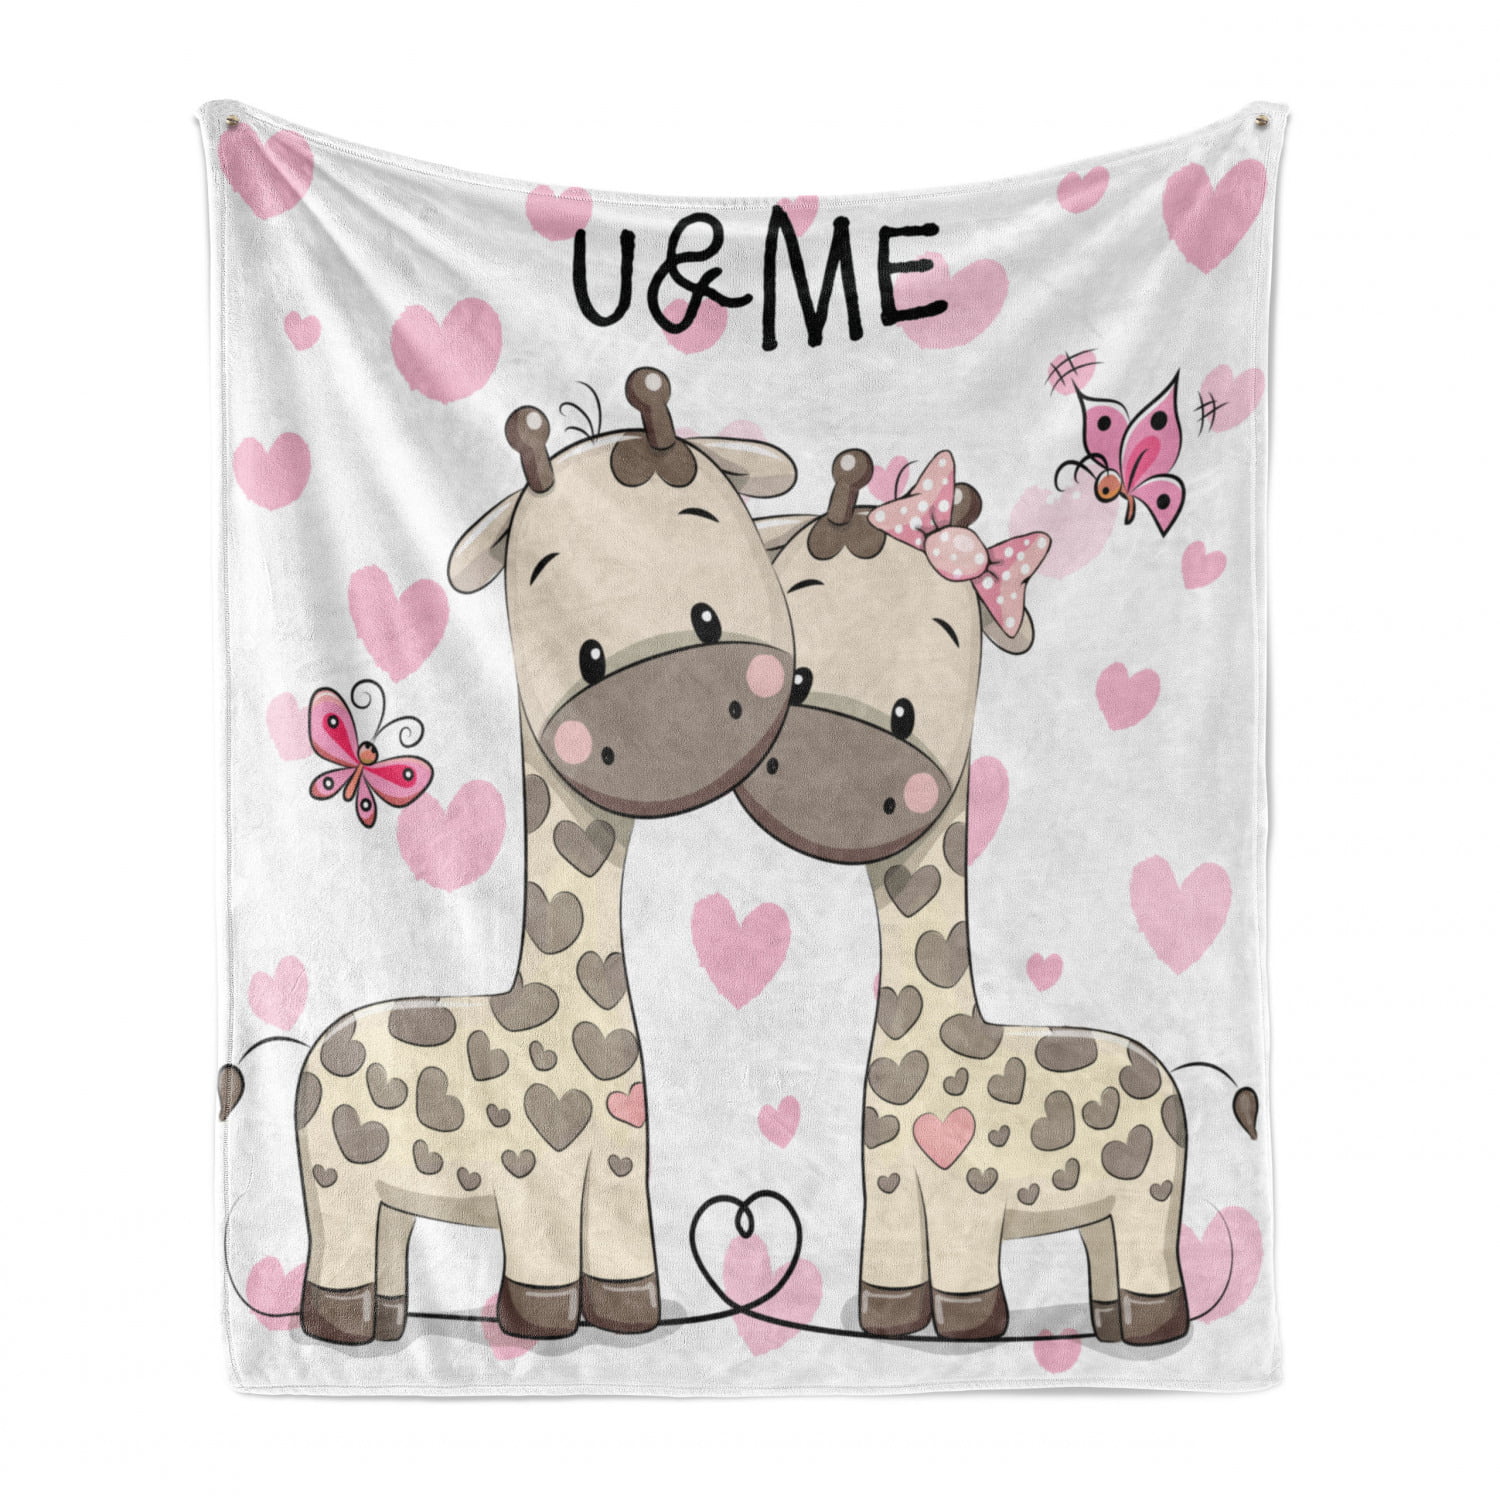 50 x 70 Giraffes Baby in Pure Love Butterflies and Hearts Bows Art Print Ambesonne Animal Soft Flannel Fleece Throw Blanket White Grey and Pink Cozy Plush for Indoor and Outdoor Use 